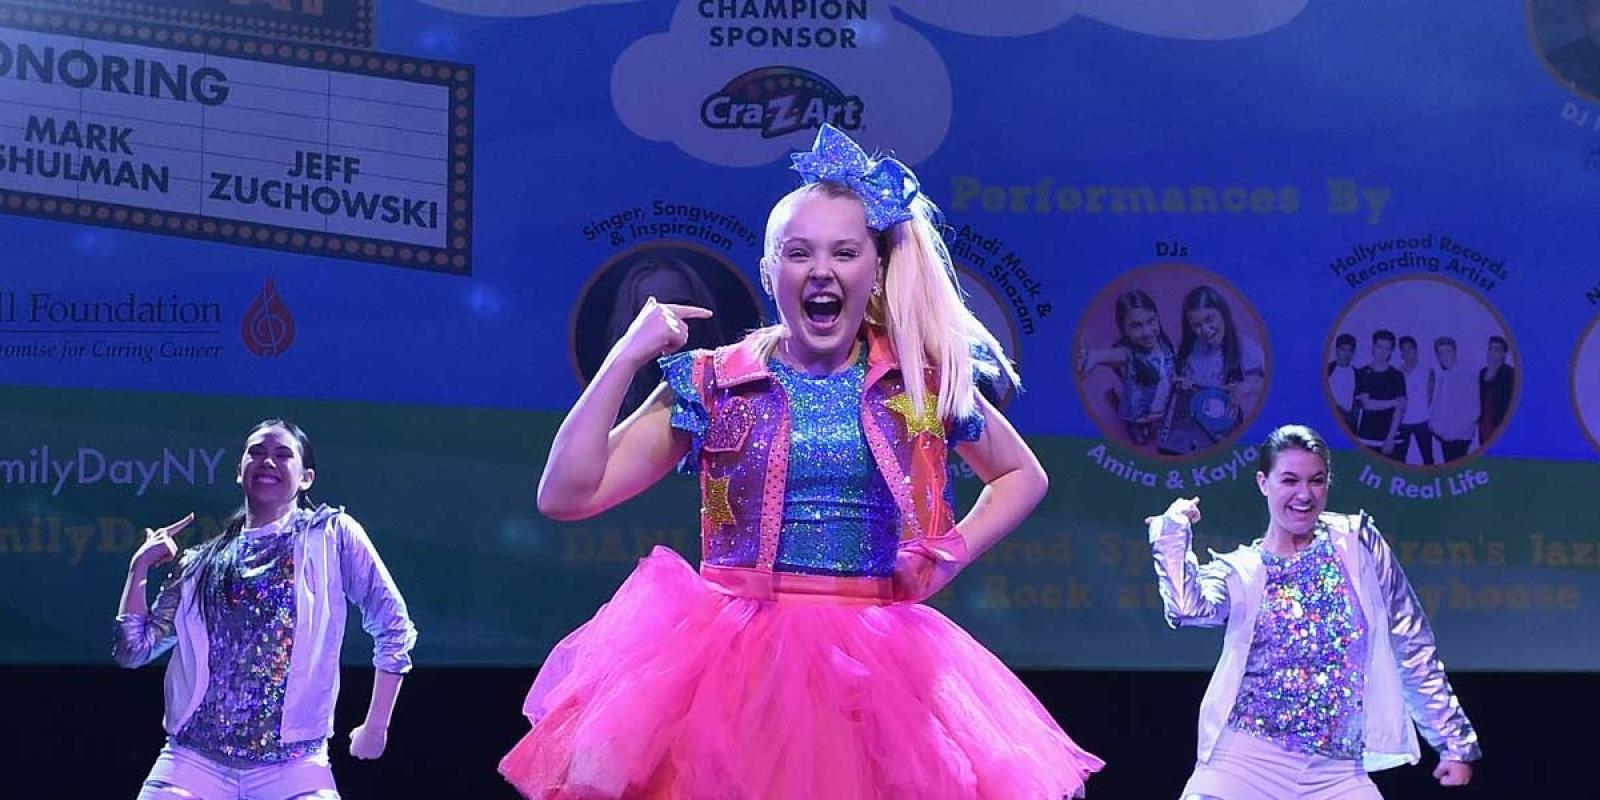 How JoJo Siwa Went From an Influencer to a Consumer Products